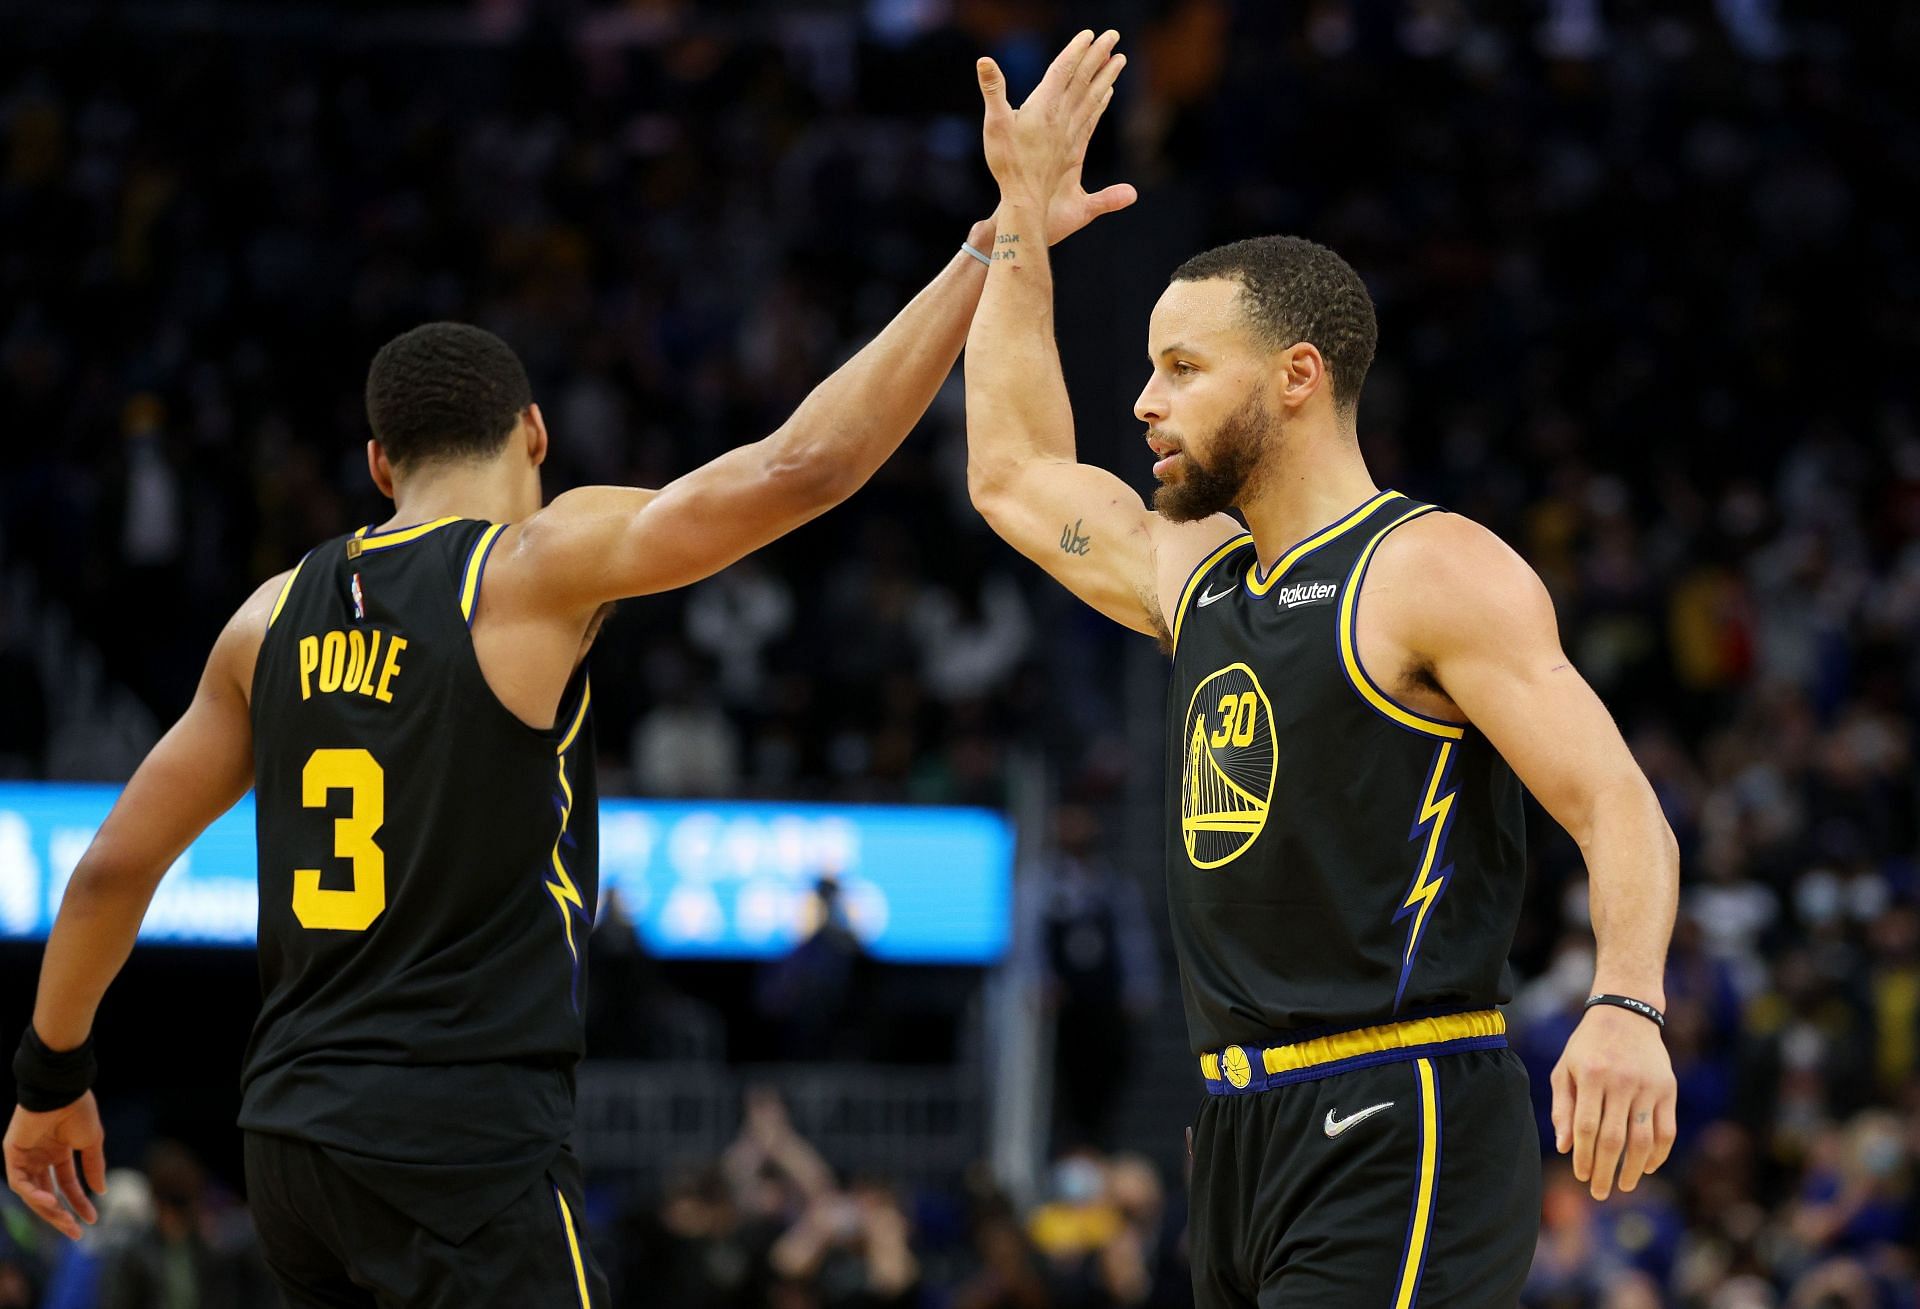 Jordan Poole and Stephen Curry high-fived each other during Miami Heat v Golden State Warriors